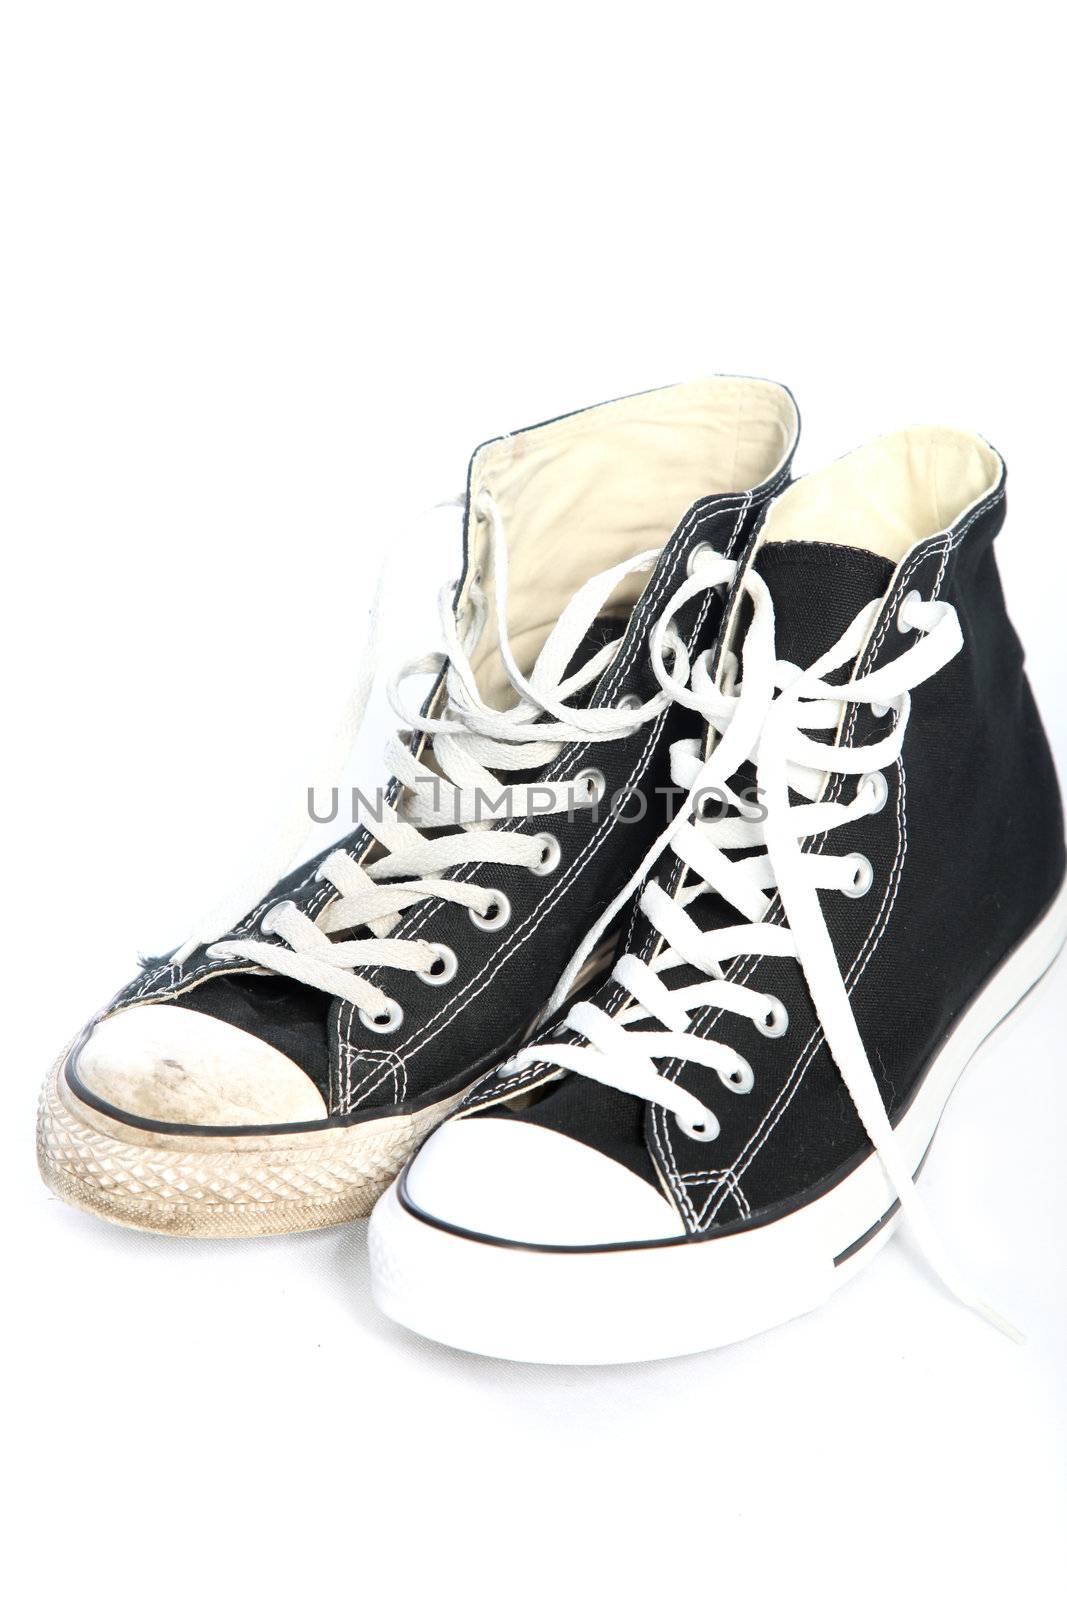 Pair of lace up sneakers or trainers in black canvas with white laces on a white background